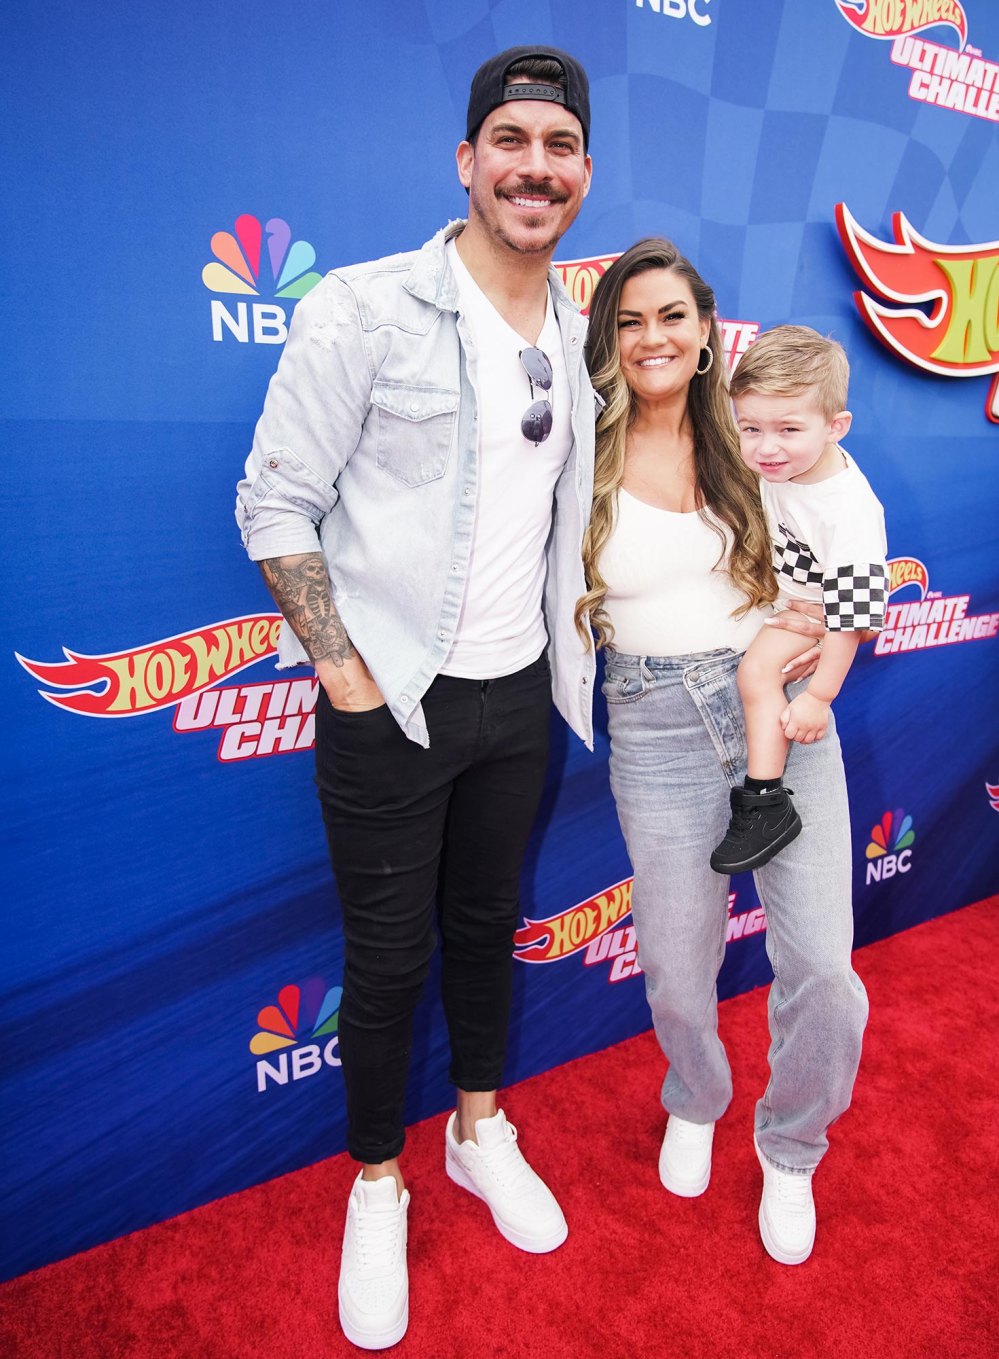 Brittany Cartwright removes Jax Taylor's last name from Instagram bio after divorce